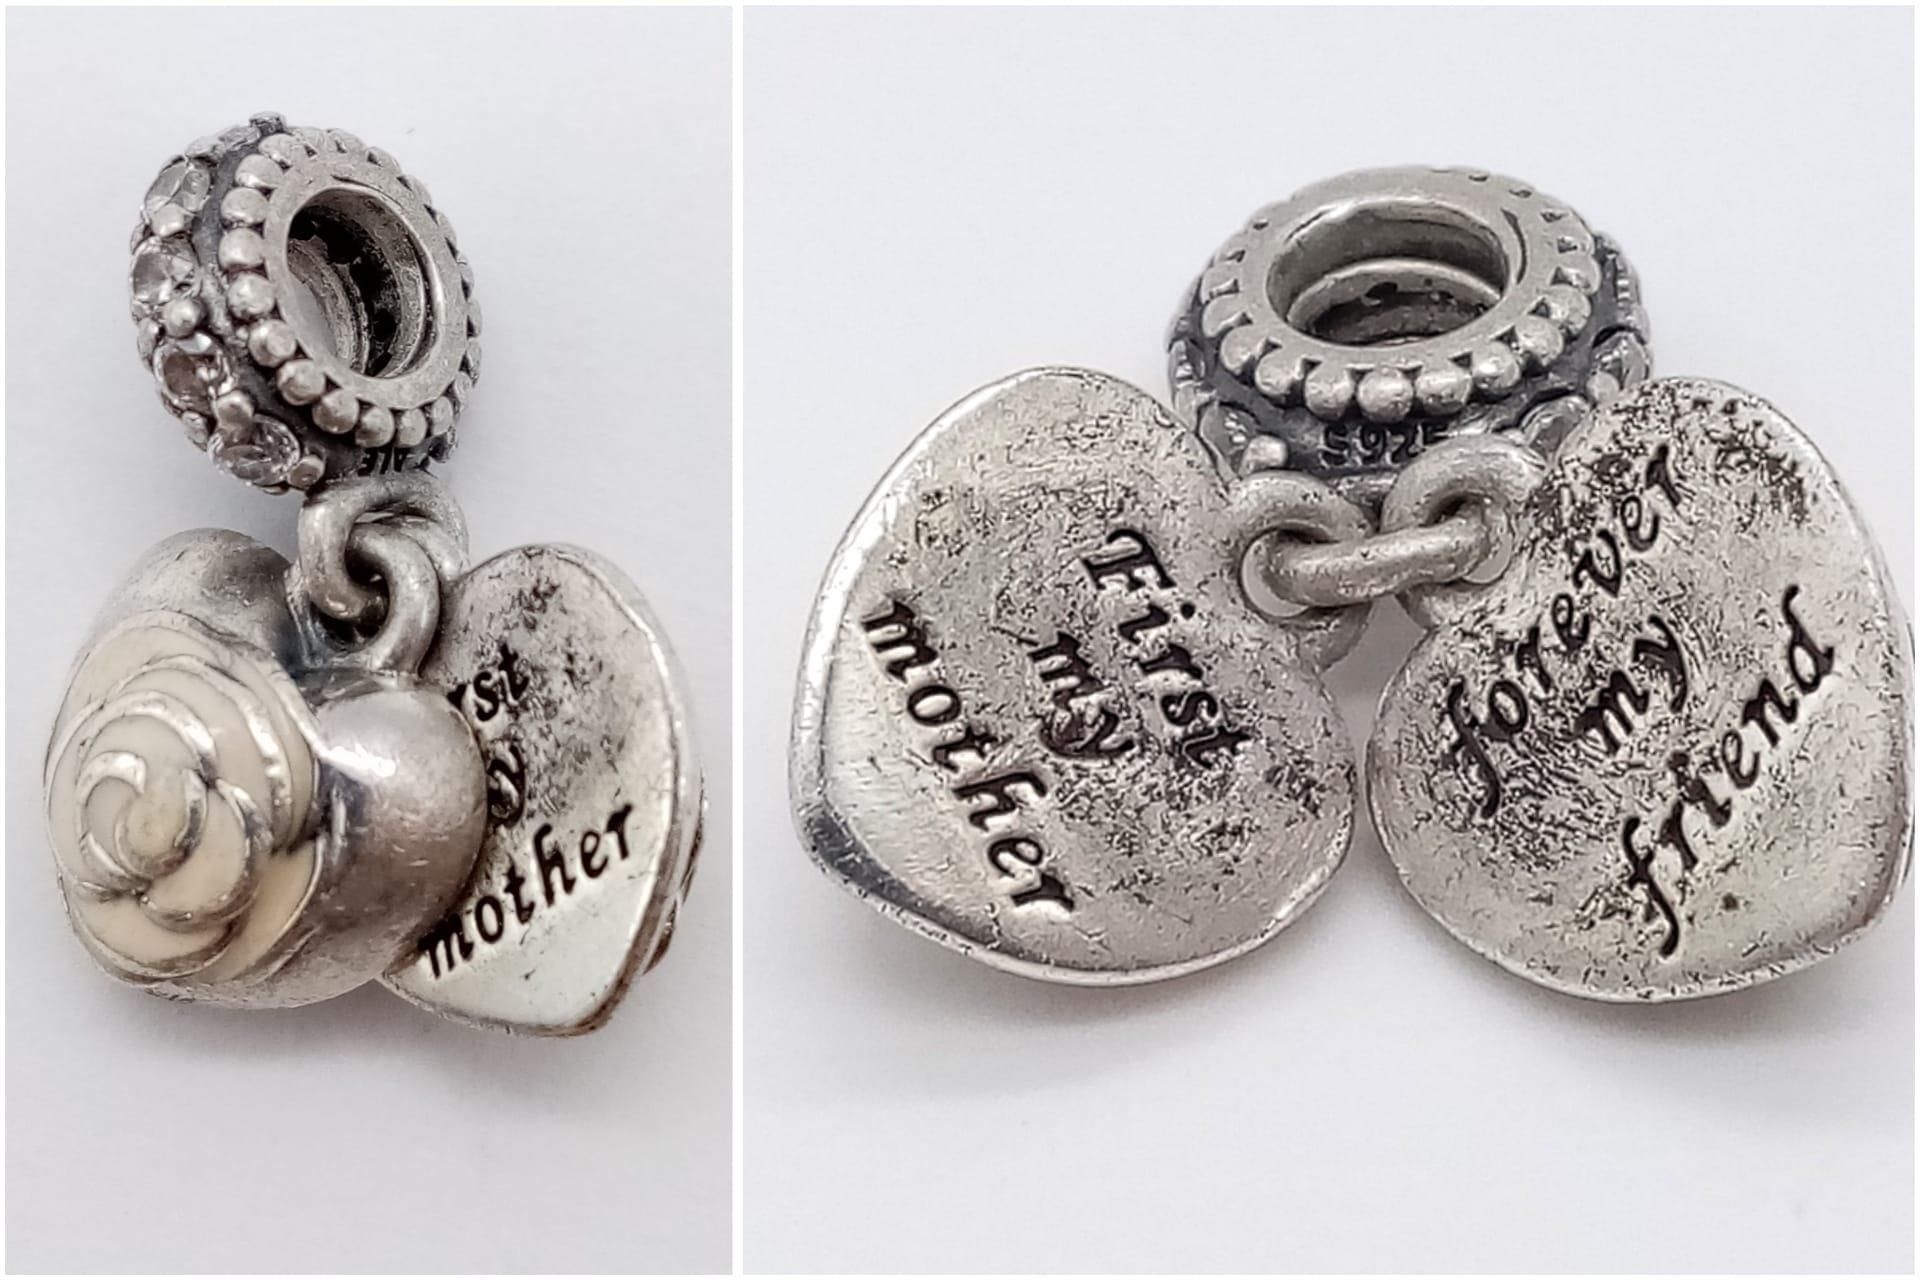 2 x Pandora Sterling Silver Heart Charms - one says 'Family' and the other says 'First My Mother, - Image 3 of 7